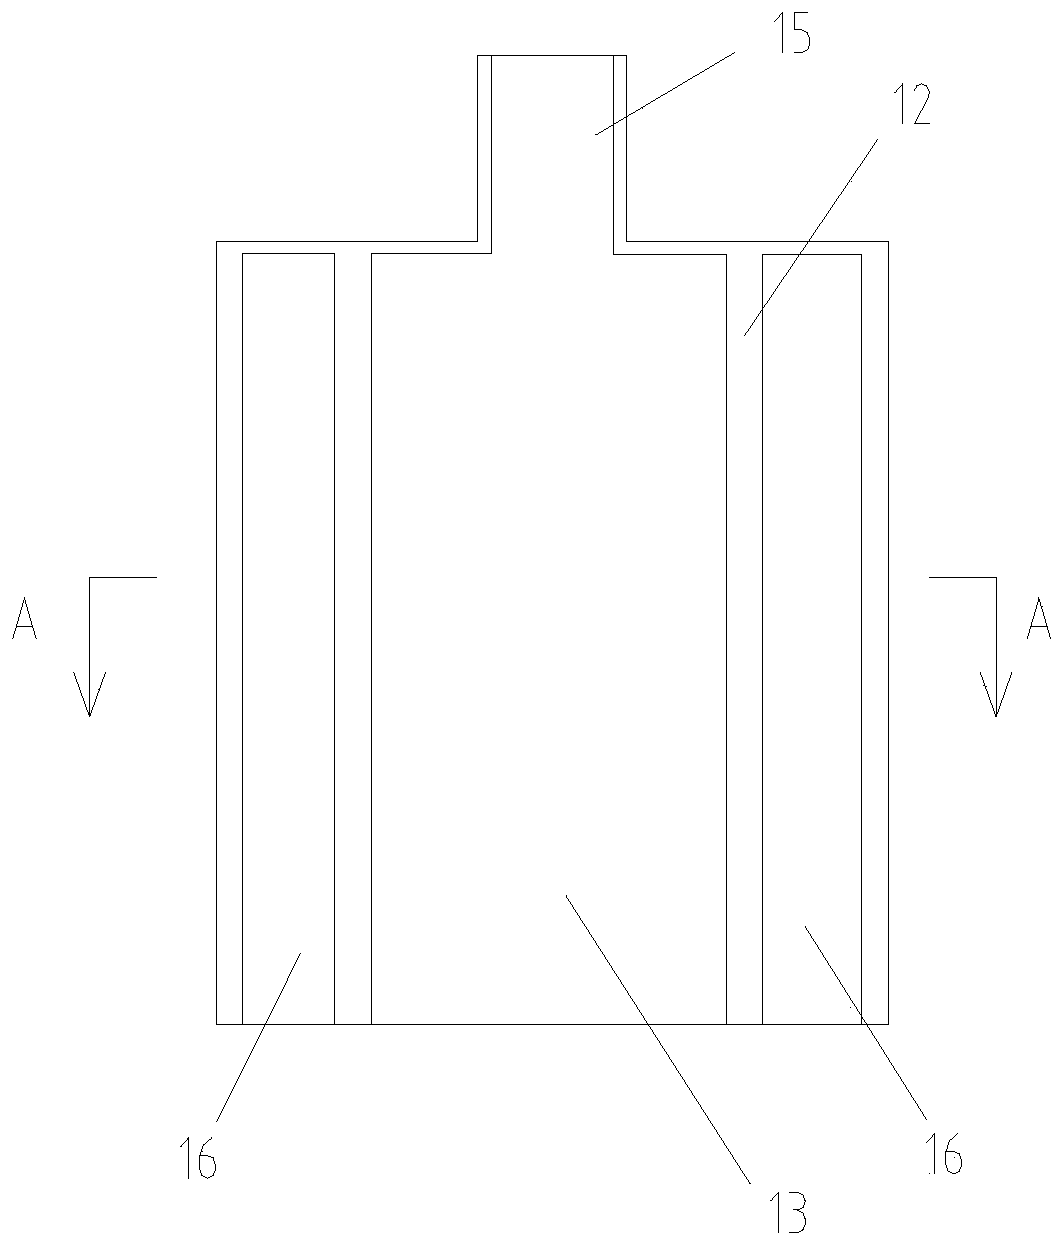 A sliding opening and closing type insulator shield